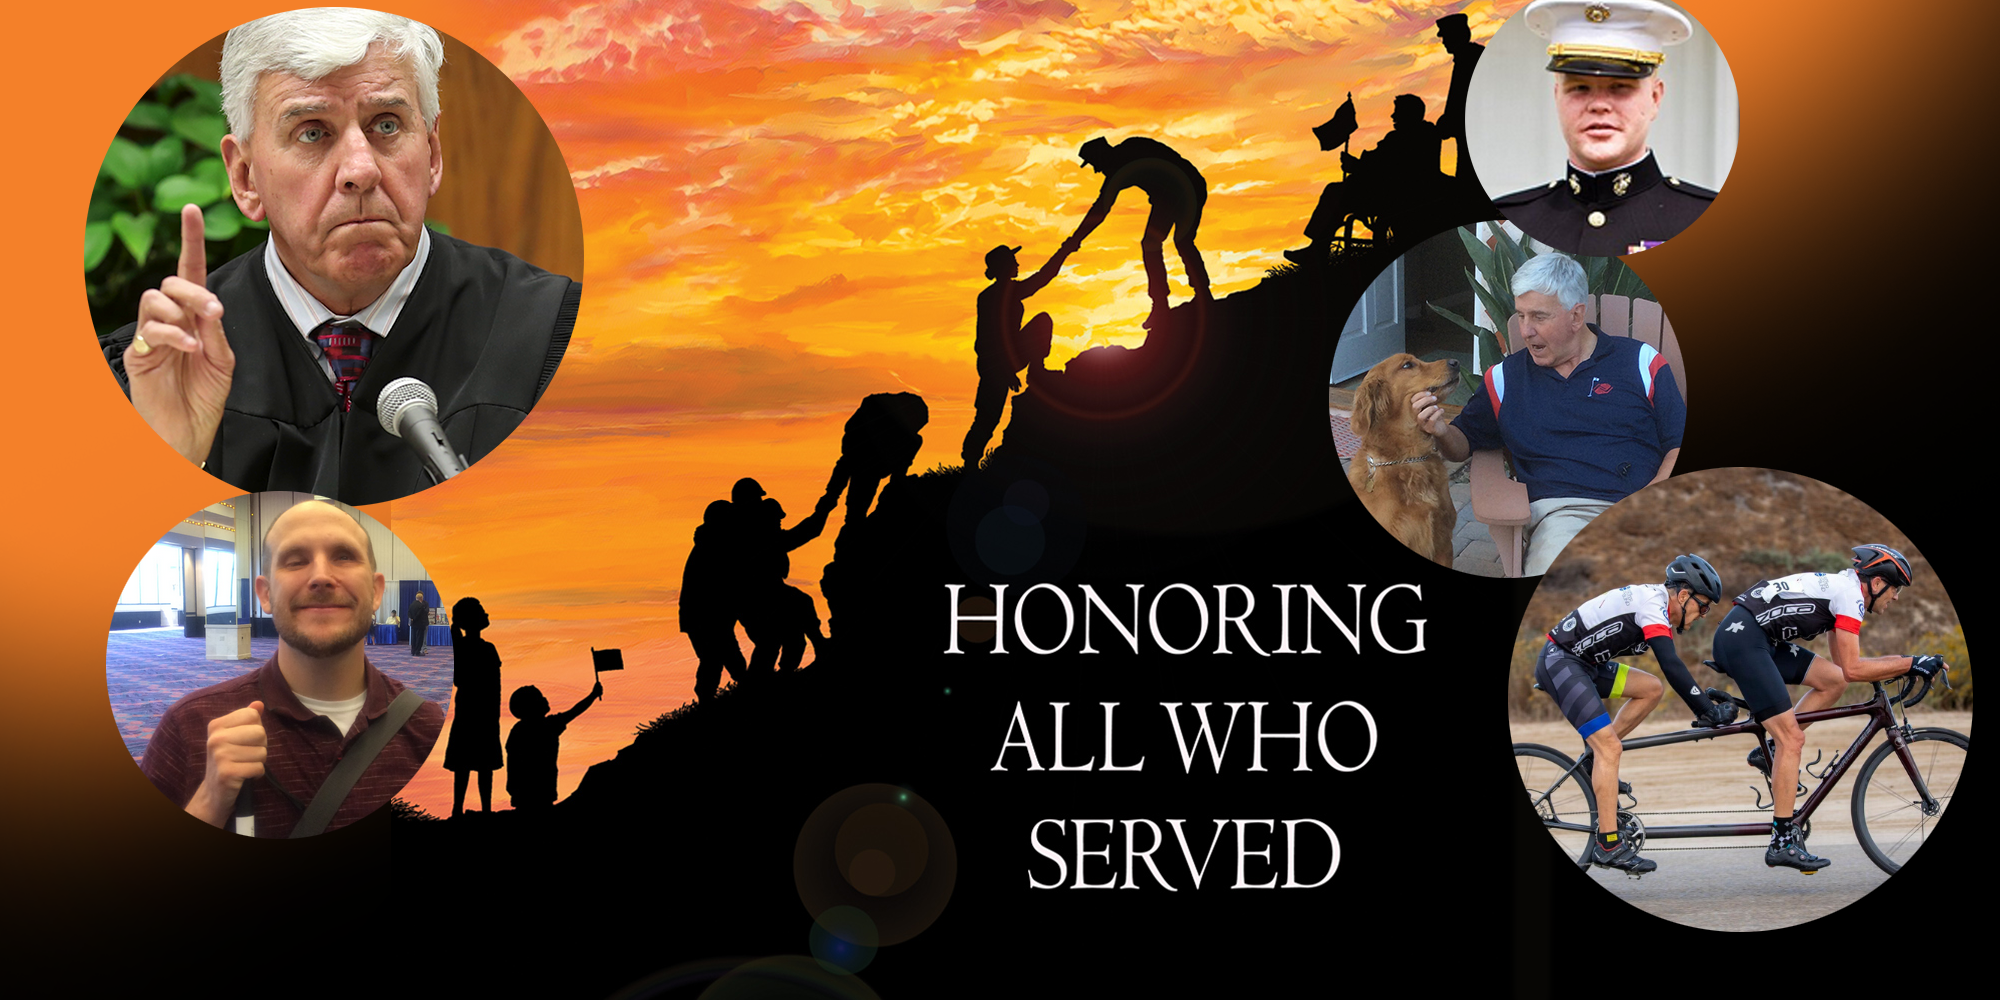 Photos of veterans David Szumowski, Tim Fallon, Tim Hornik, and Tom Perez overlay a background showing soldiers climbing a hill and saying Honoring All Who Served